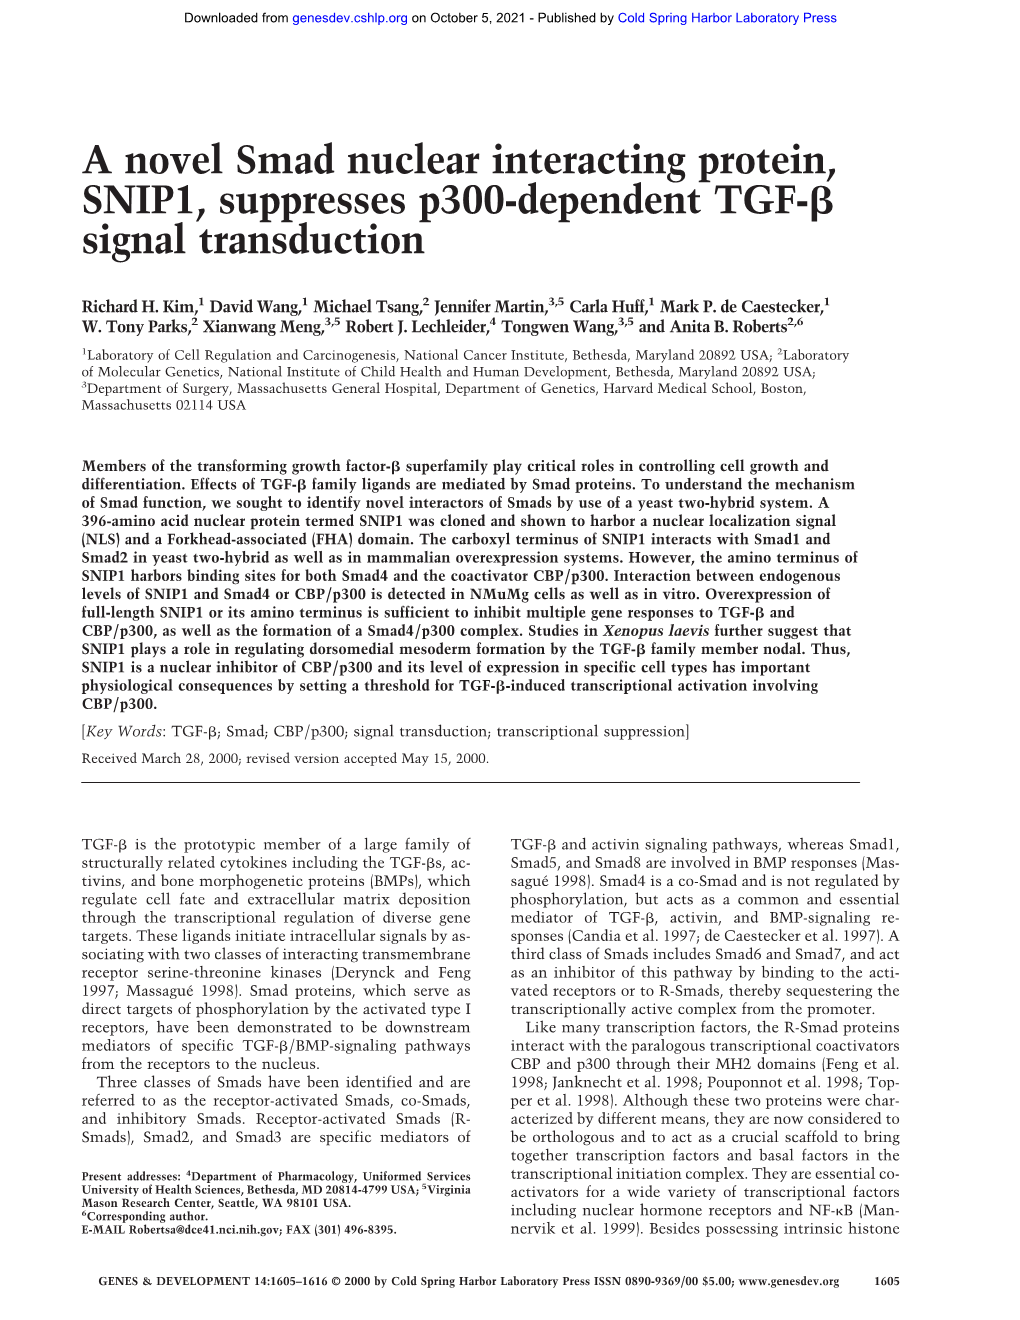 A Novel Smad Nuclear Interacting Protein, SNIP1, Suppresses P300-Dependent TGF-␤ Signal Transduction